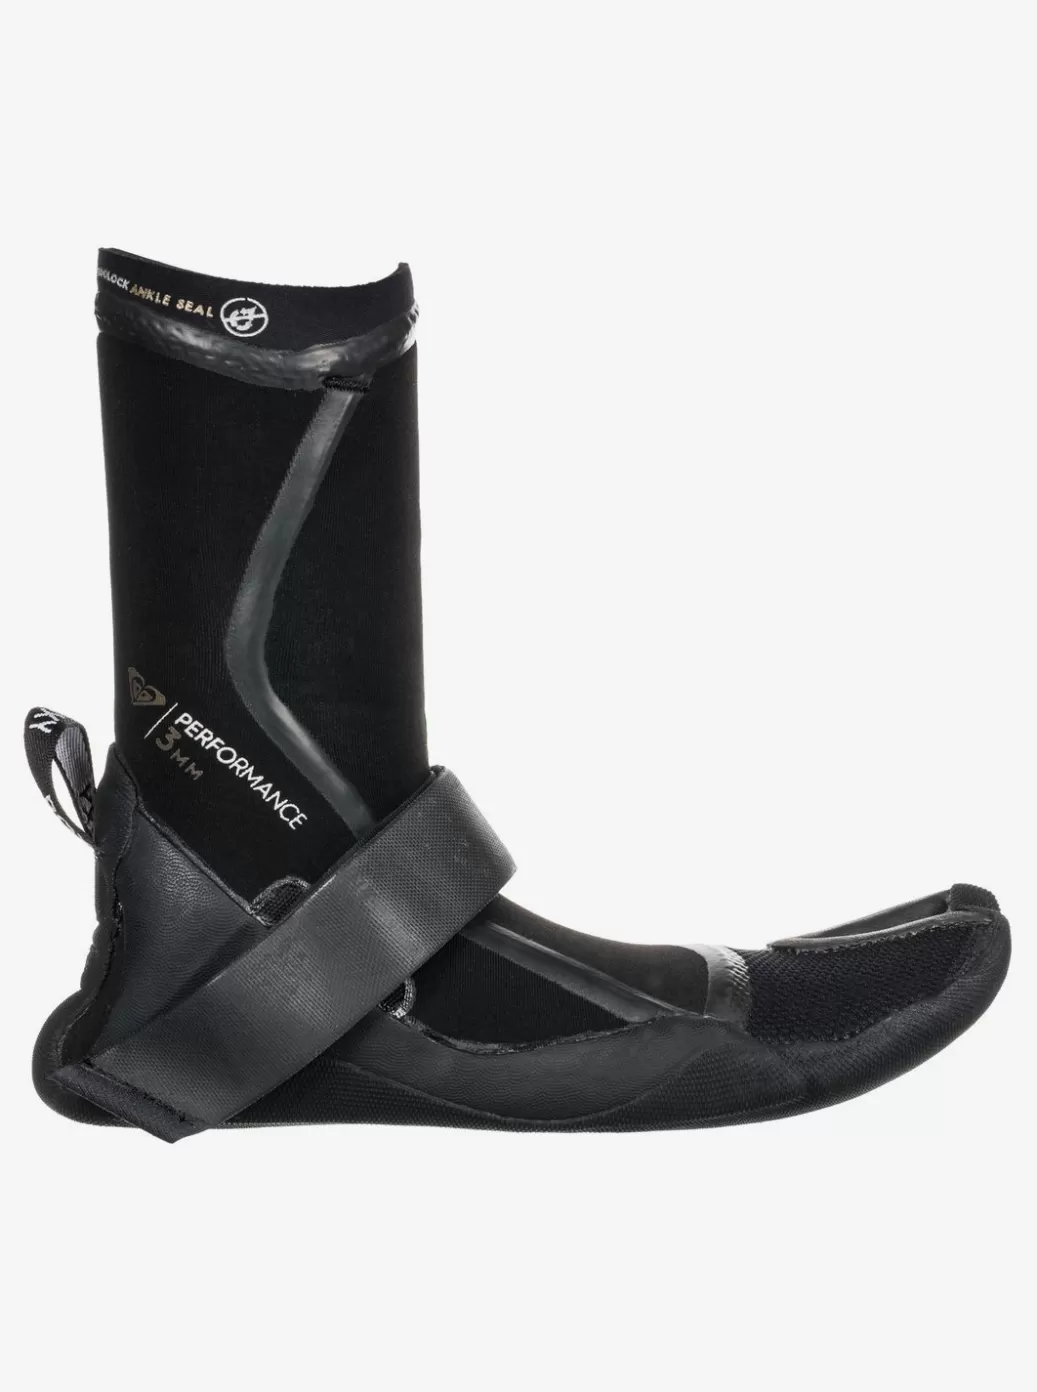 Surf Boots | WOMEN ROXY 3mm Performance Wetsuit Accessory Black